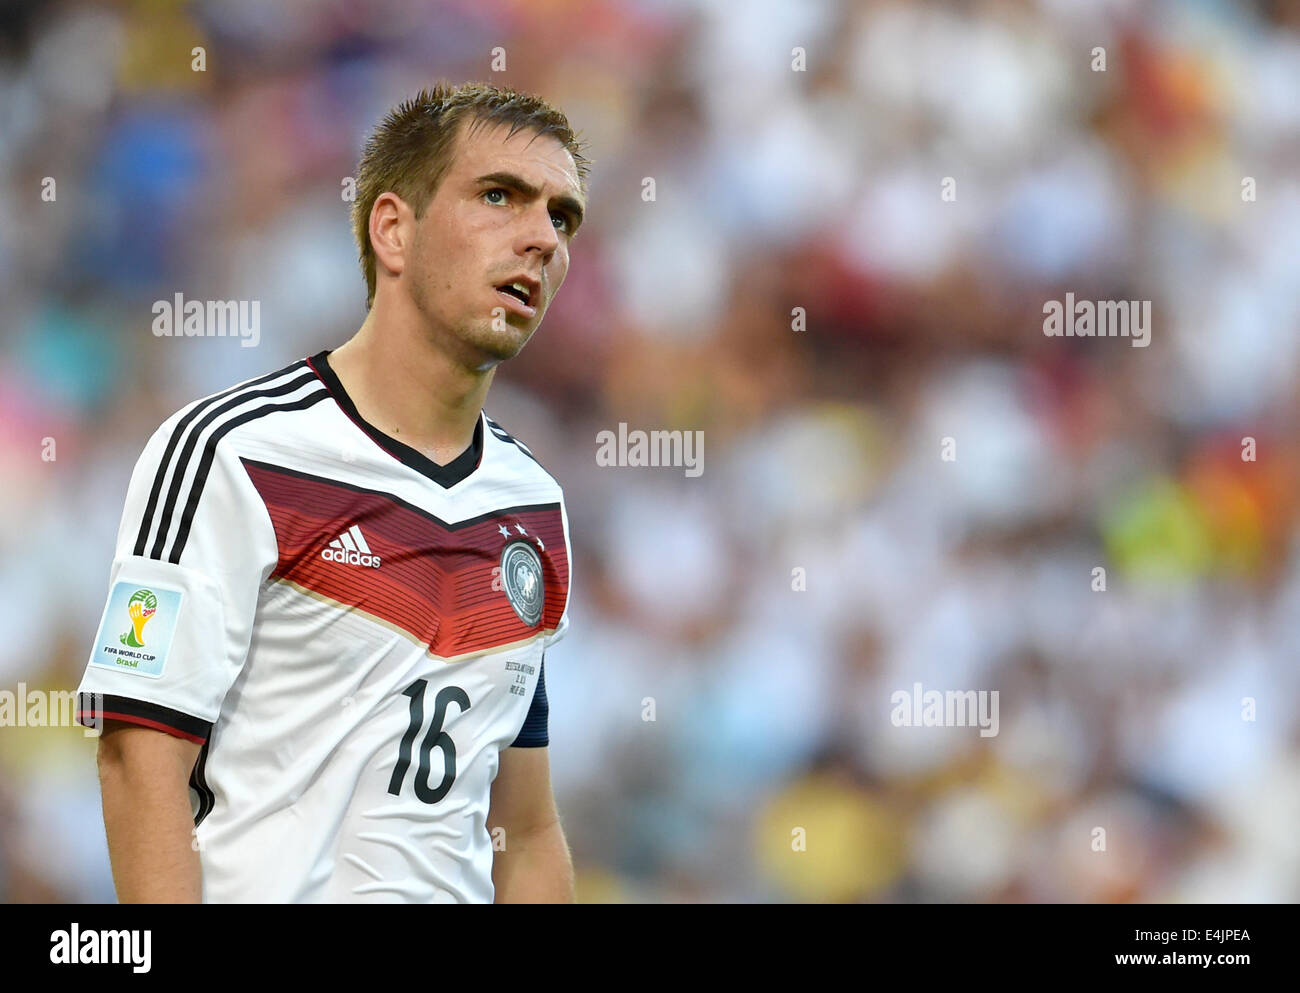 Rio de Janeiro, Brazil. 13th July, 2014. Philipp Lahm of Germany reacts during the FIFA World Cup 2014 final soccer match between Germany and Argentina at the Estadio do Maracana in Rio de Janeiro, Brazil, 13 July 2014. Photo: Andreas Gebert/dpa/Alamy Live News Stock Photo